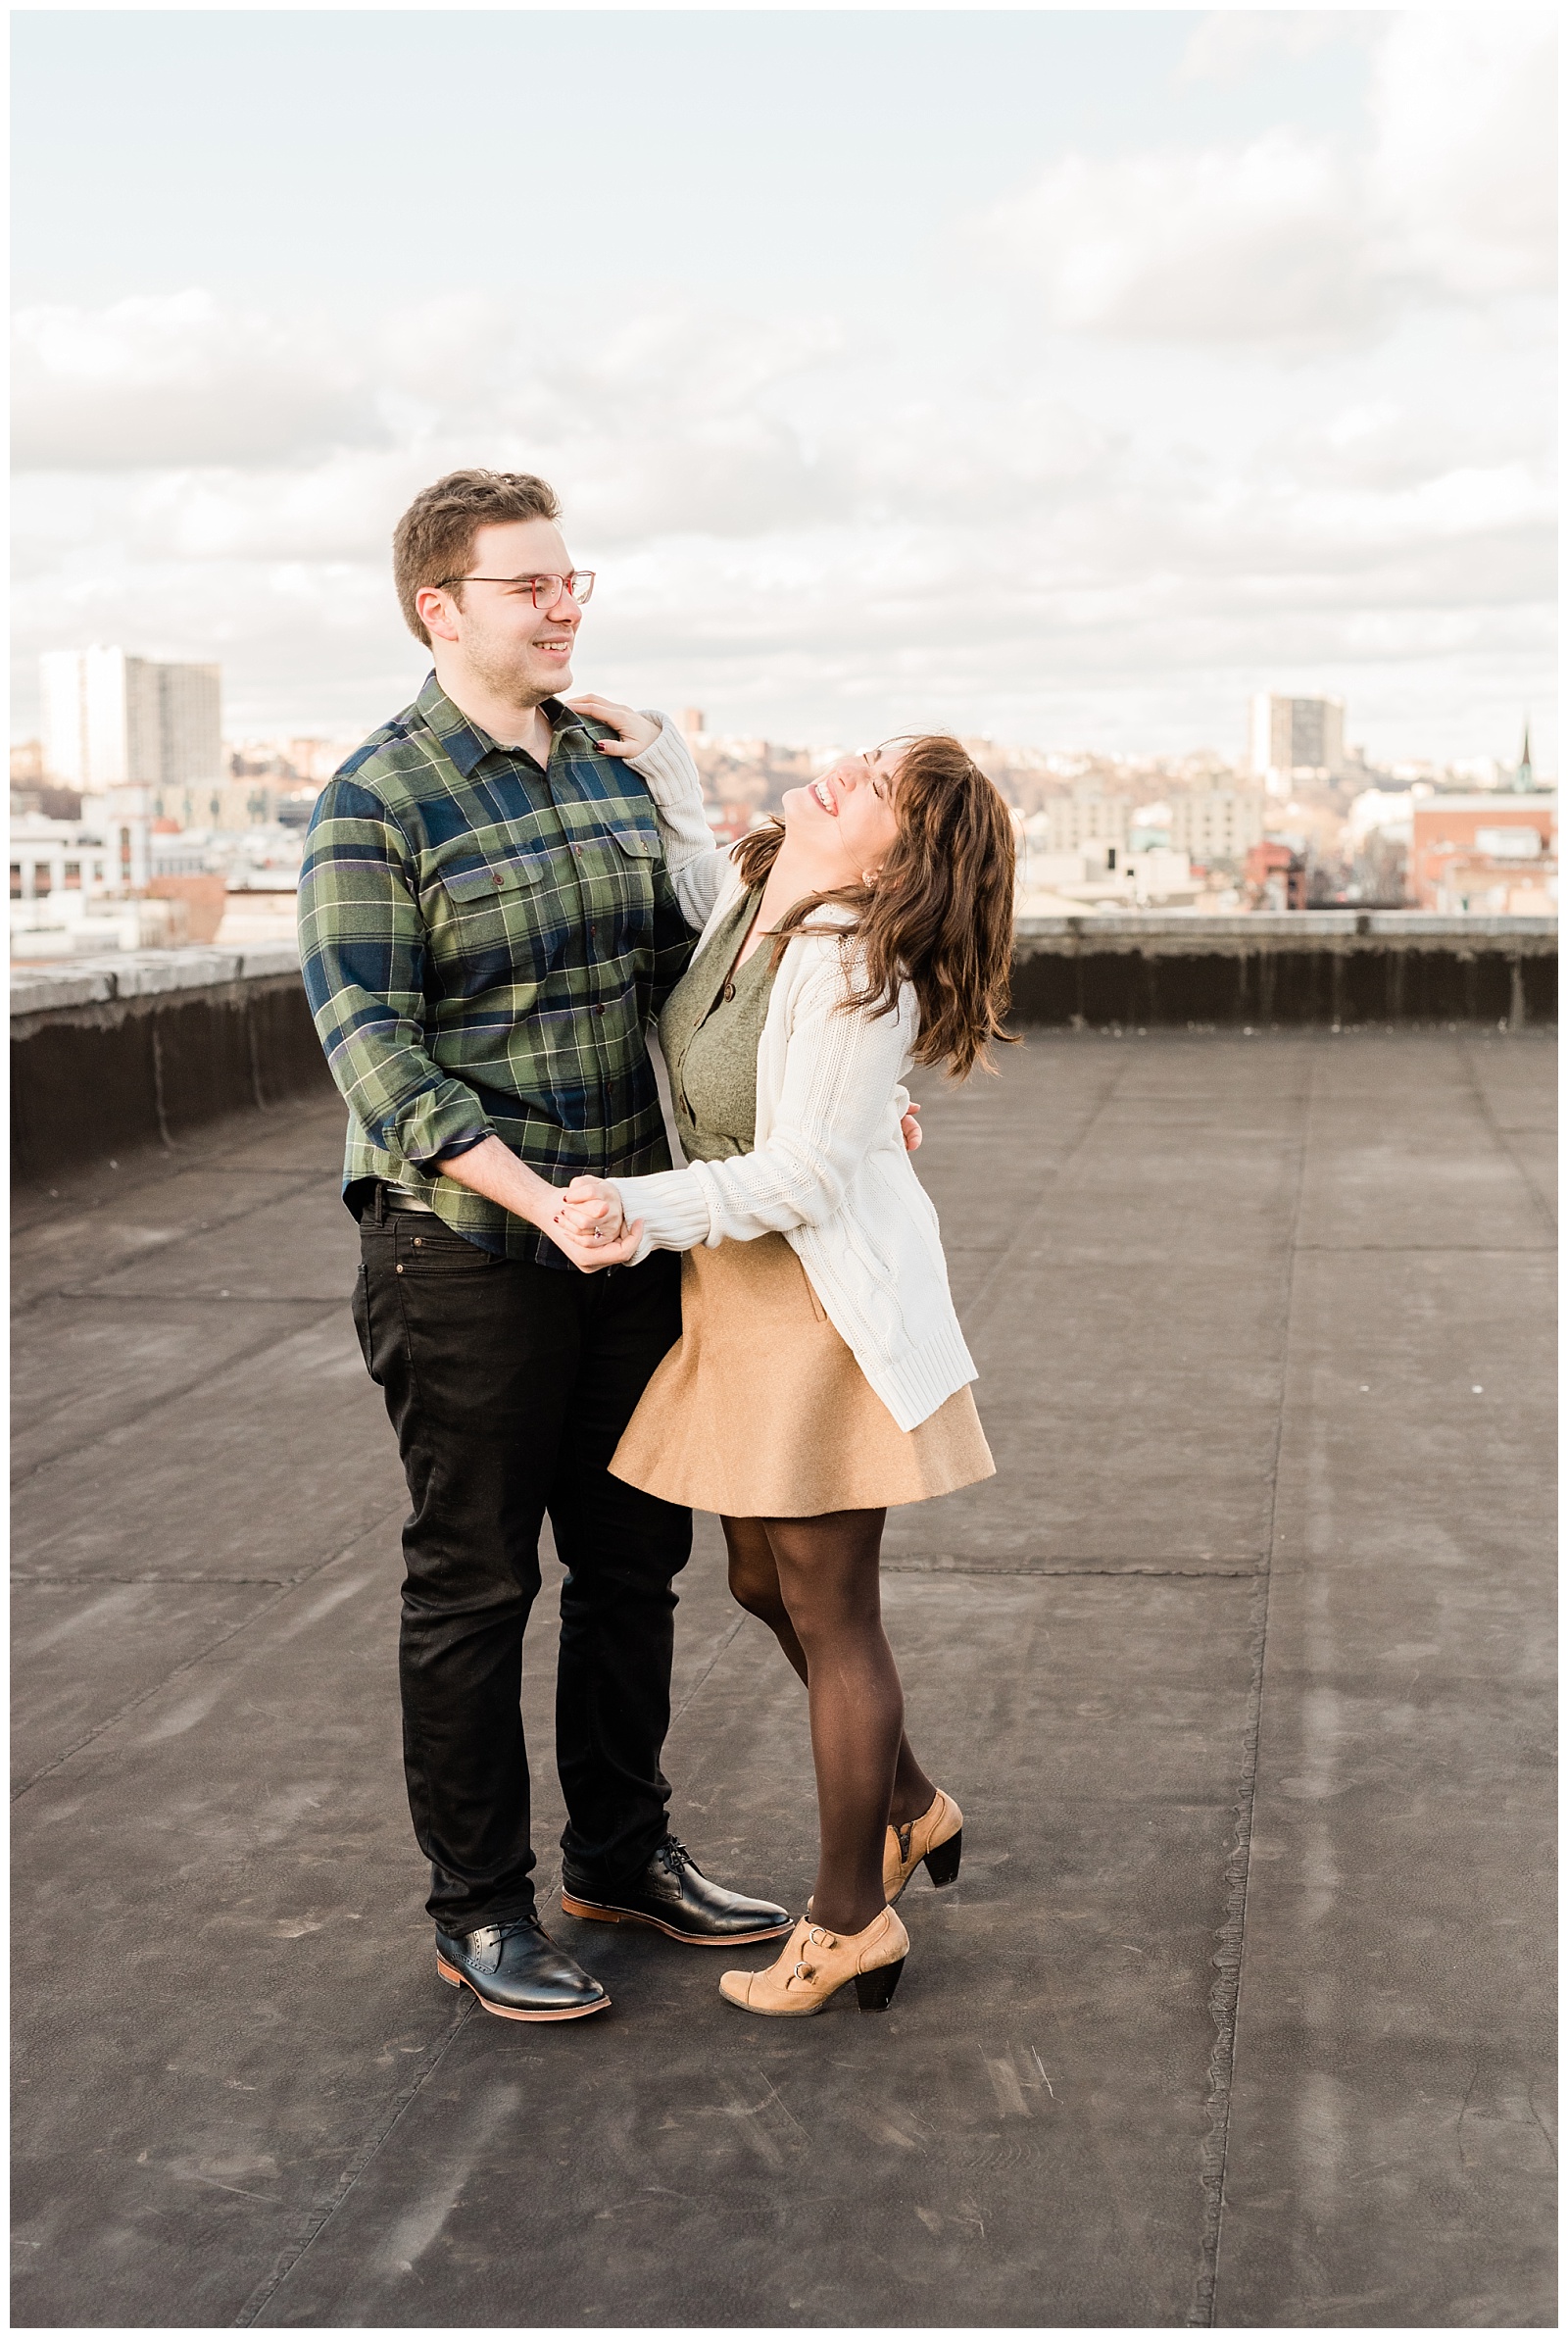 Hoboken, NJ, New Jersey, Rooftop, Engagement Session, Urban, City, Golden Hour, Dancing, Laughter, Laughing